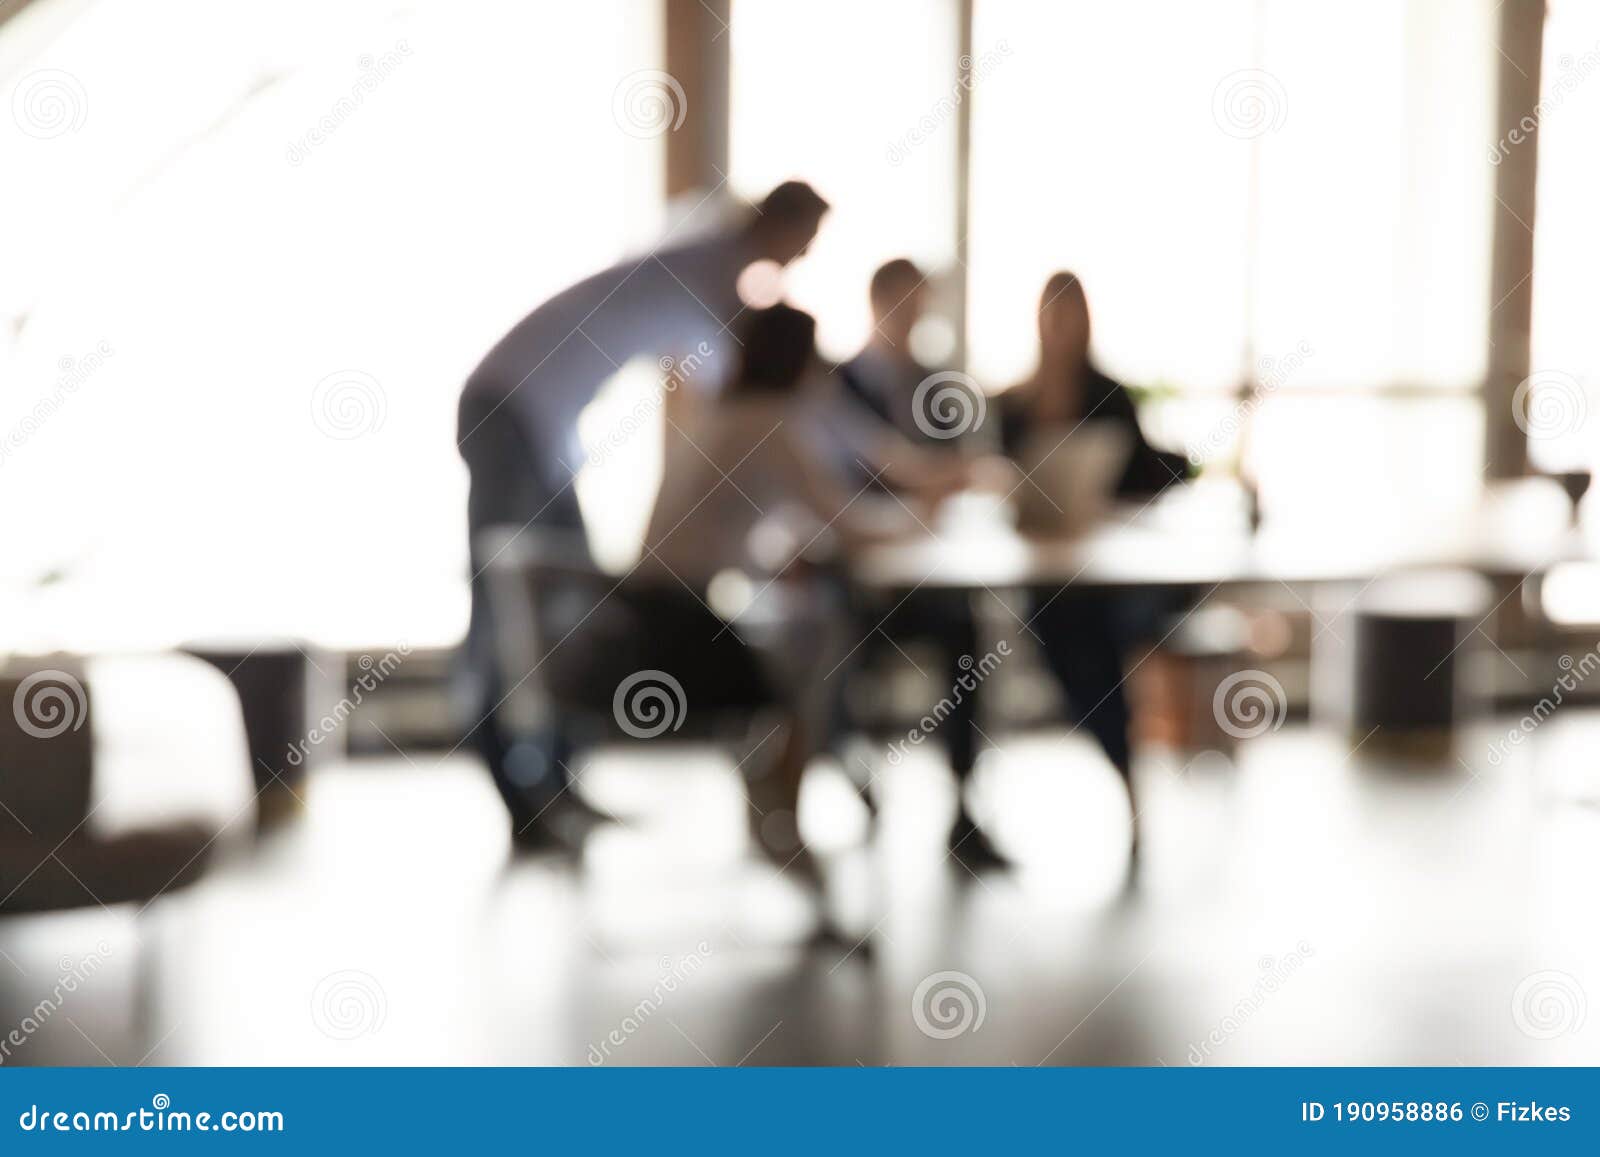 blurry view of colleagues work together on project in office